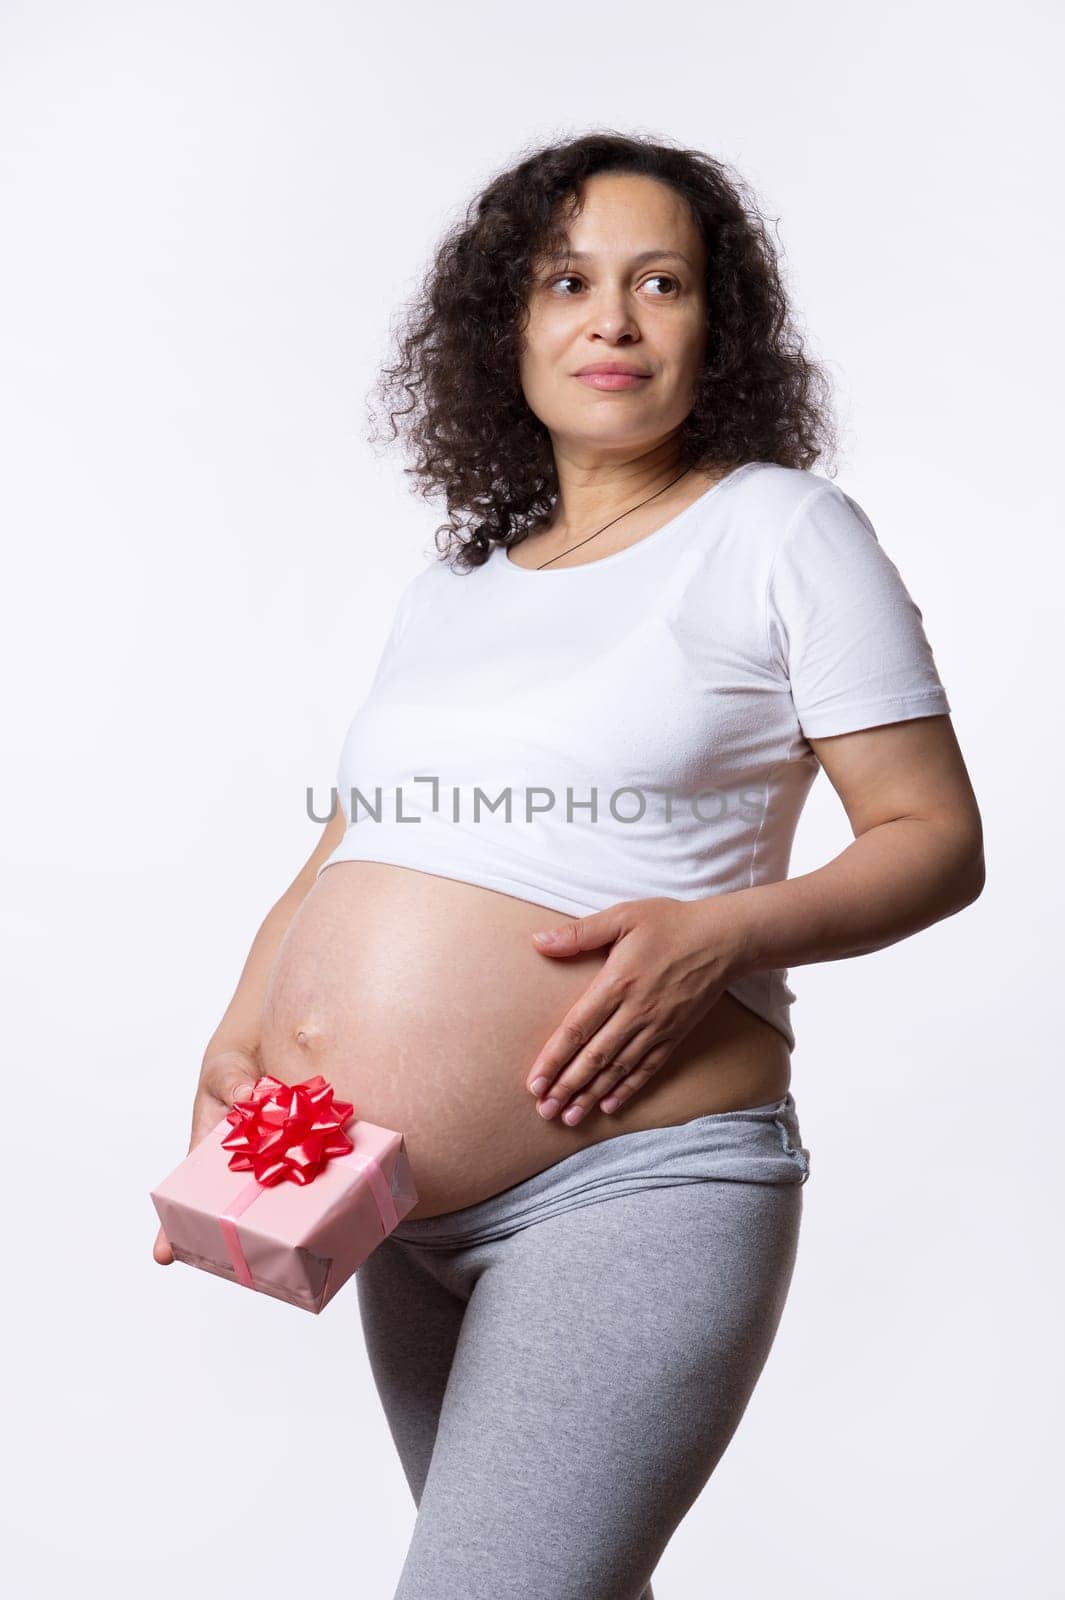 Beautiful pregnant woman holding cute gift box near her naked belly, isolated on white. Happy Mother's Day concept by artgf